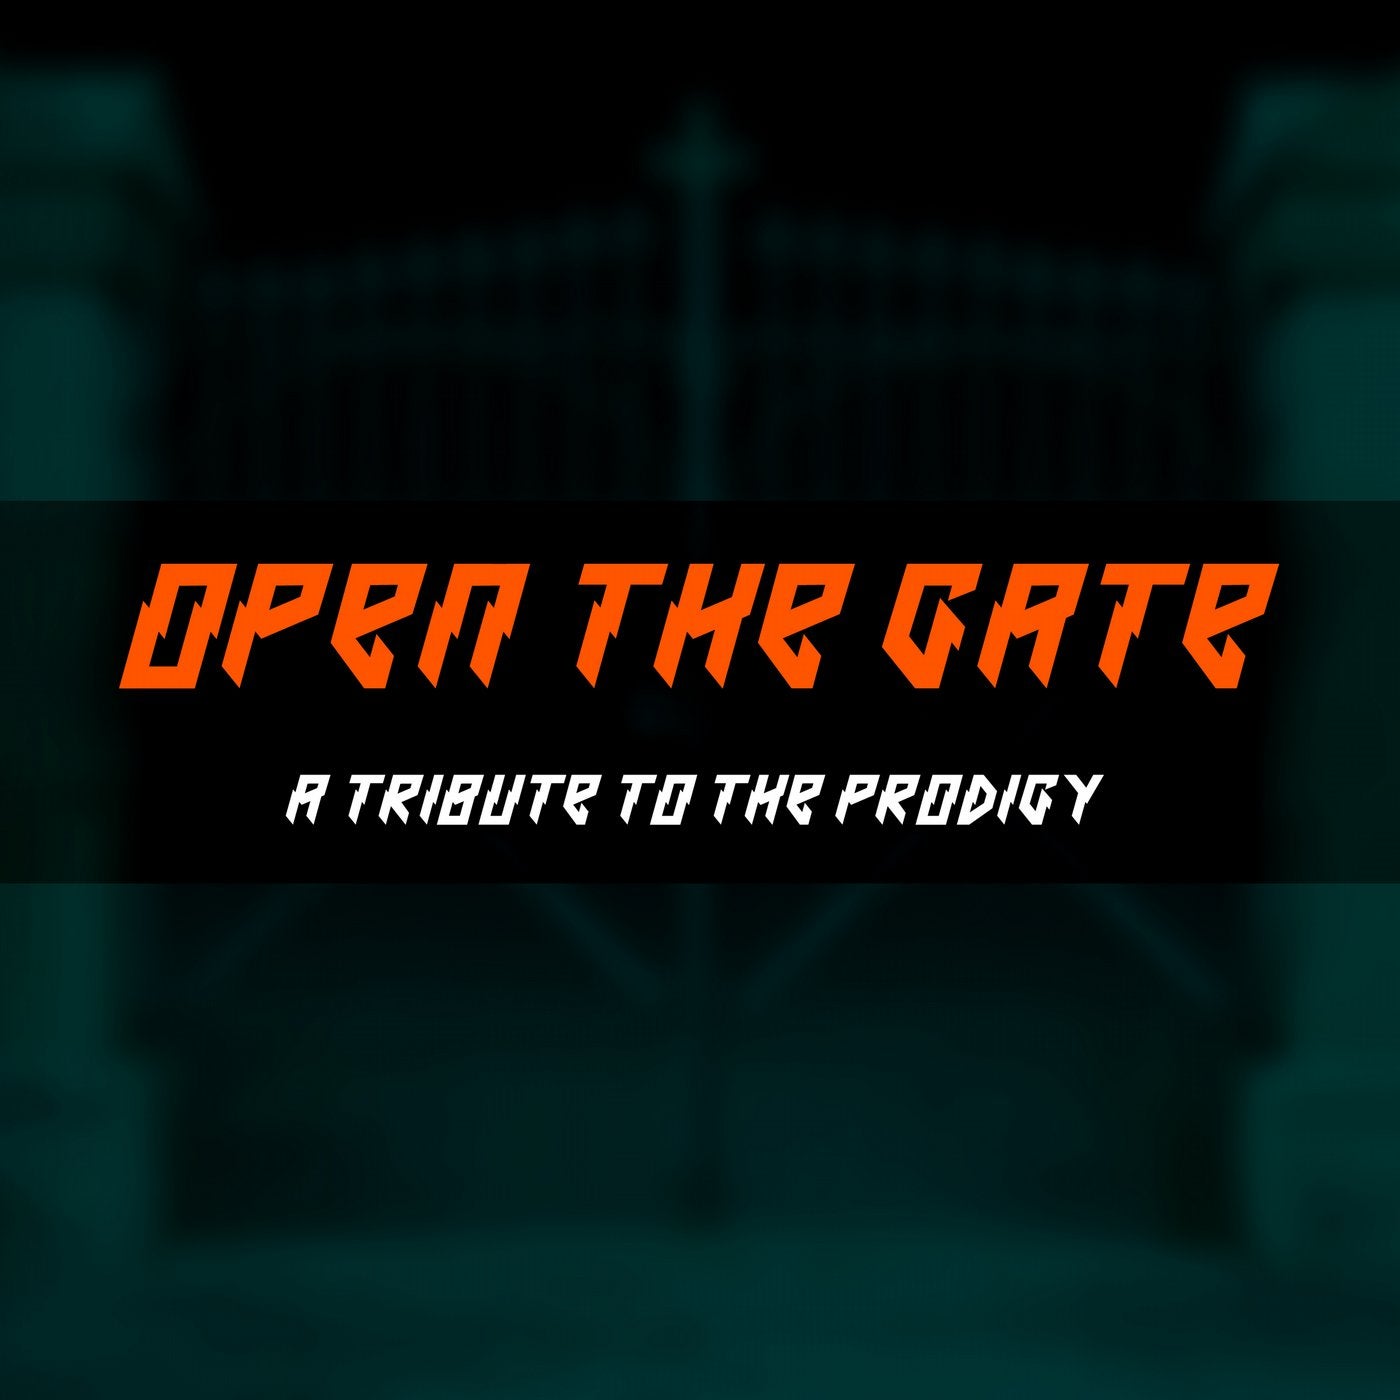 Open The Gate (A Tribute To The Prodigy)